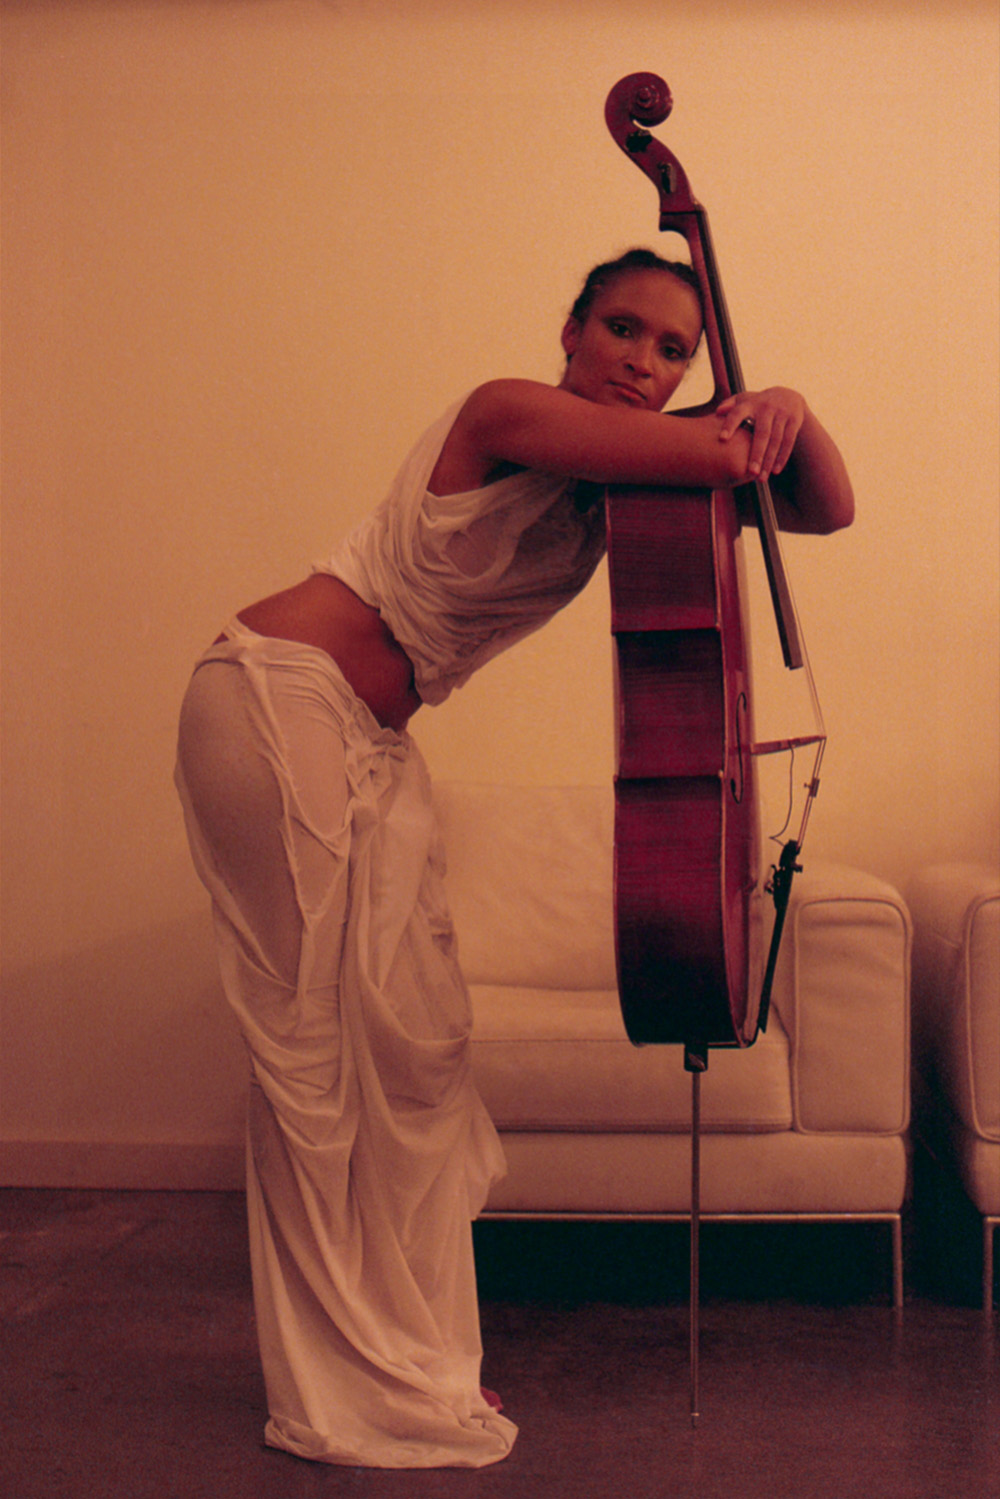 A photo of Ouri, wearing a white long skirt and top, posing with a cello